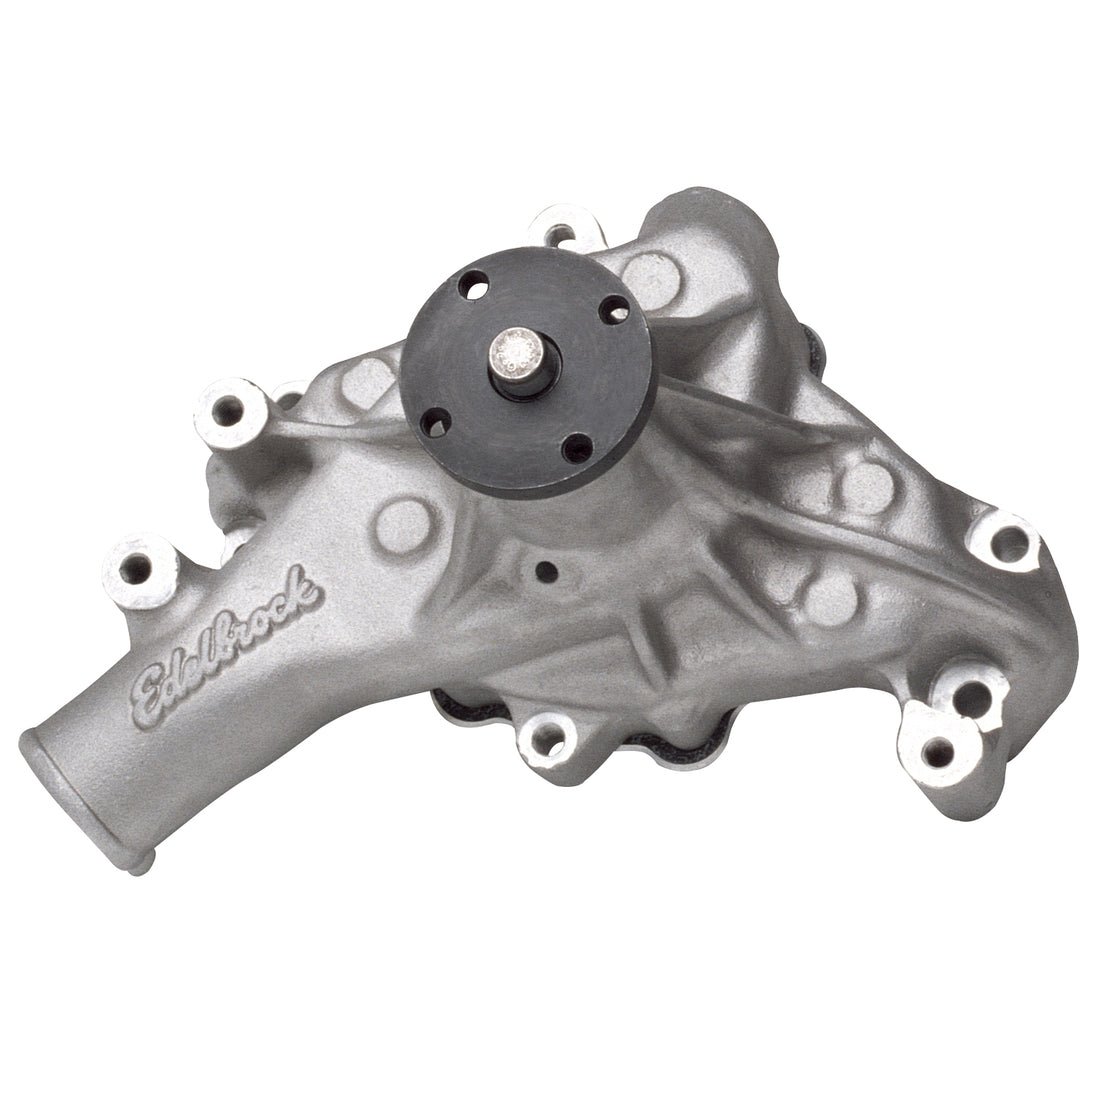 Water Pump for Small-Block Chevy in Satin Finish (Long) Edelbrock